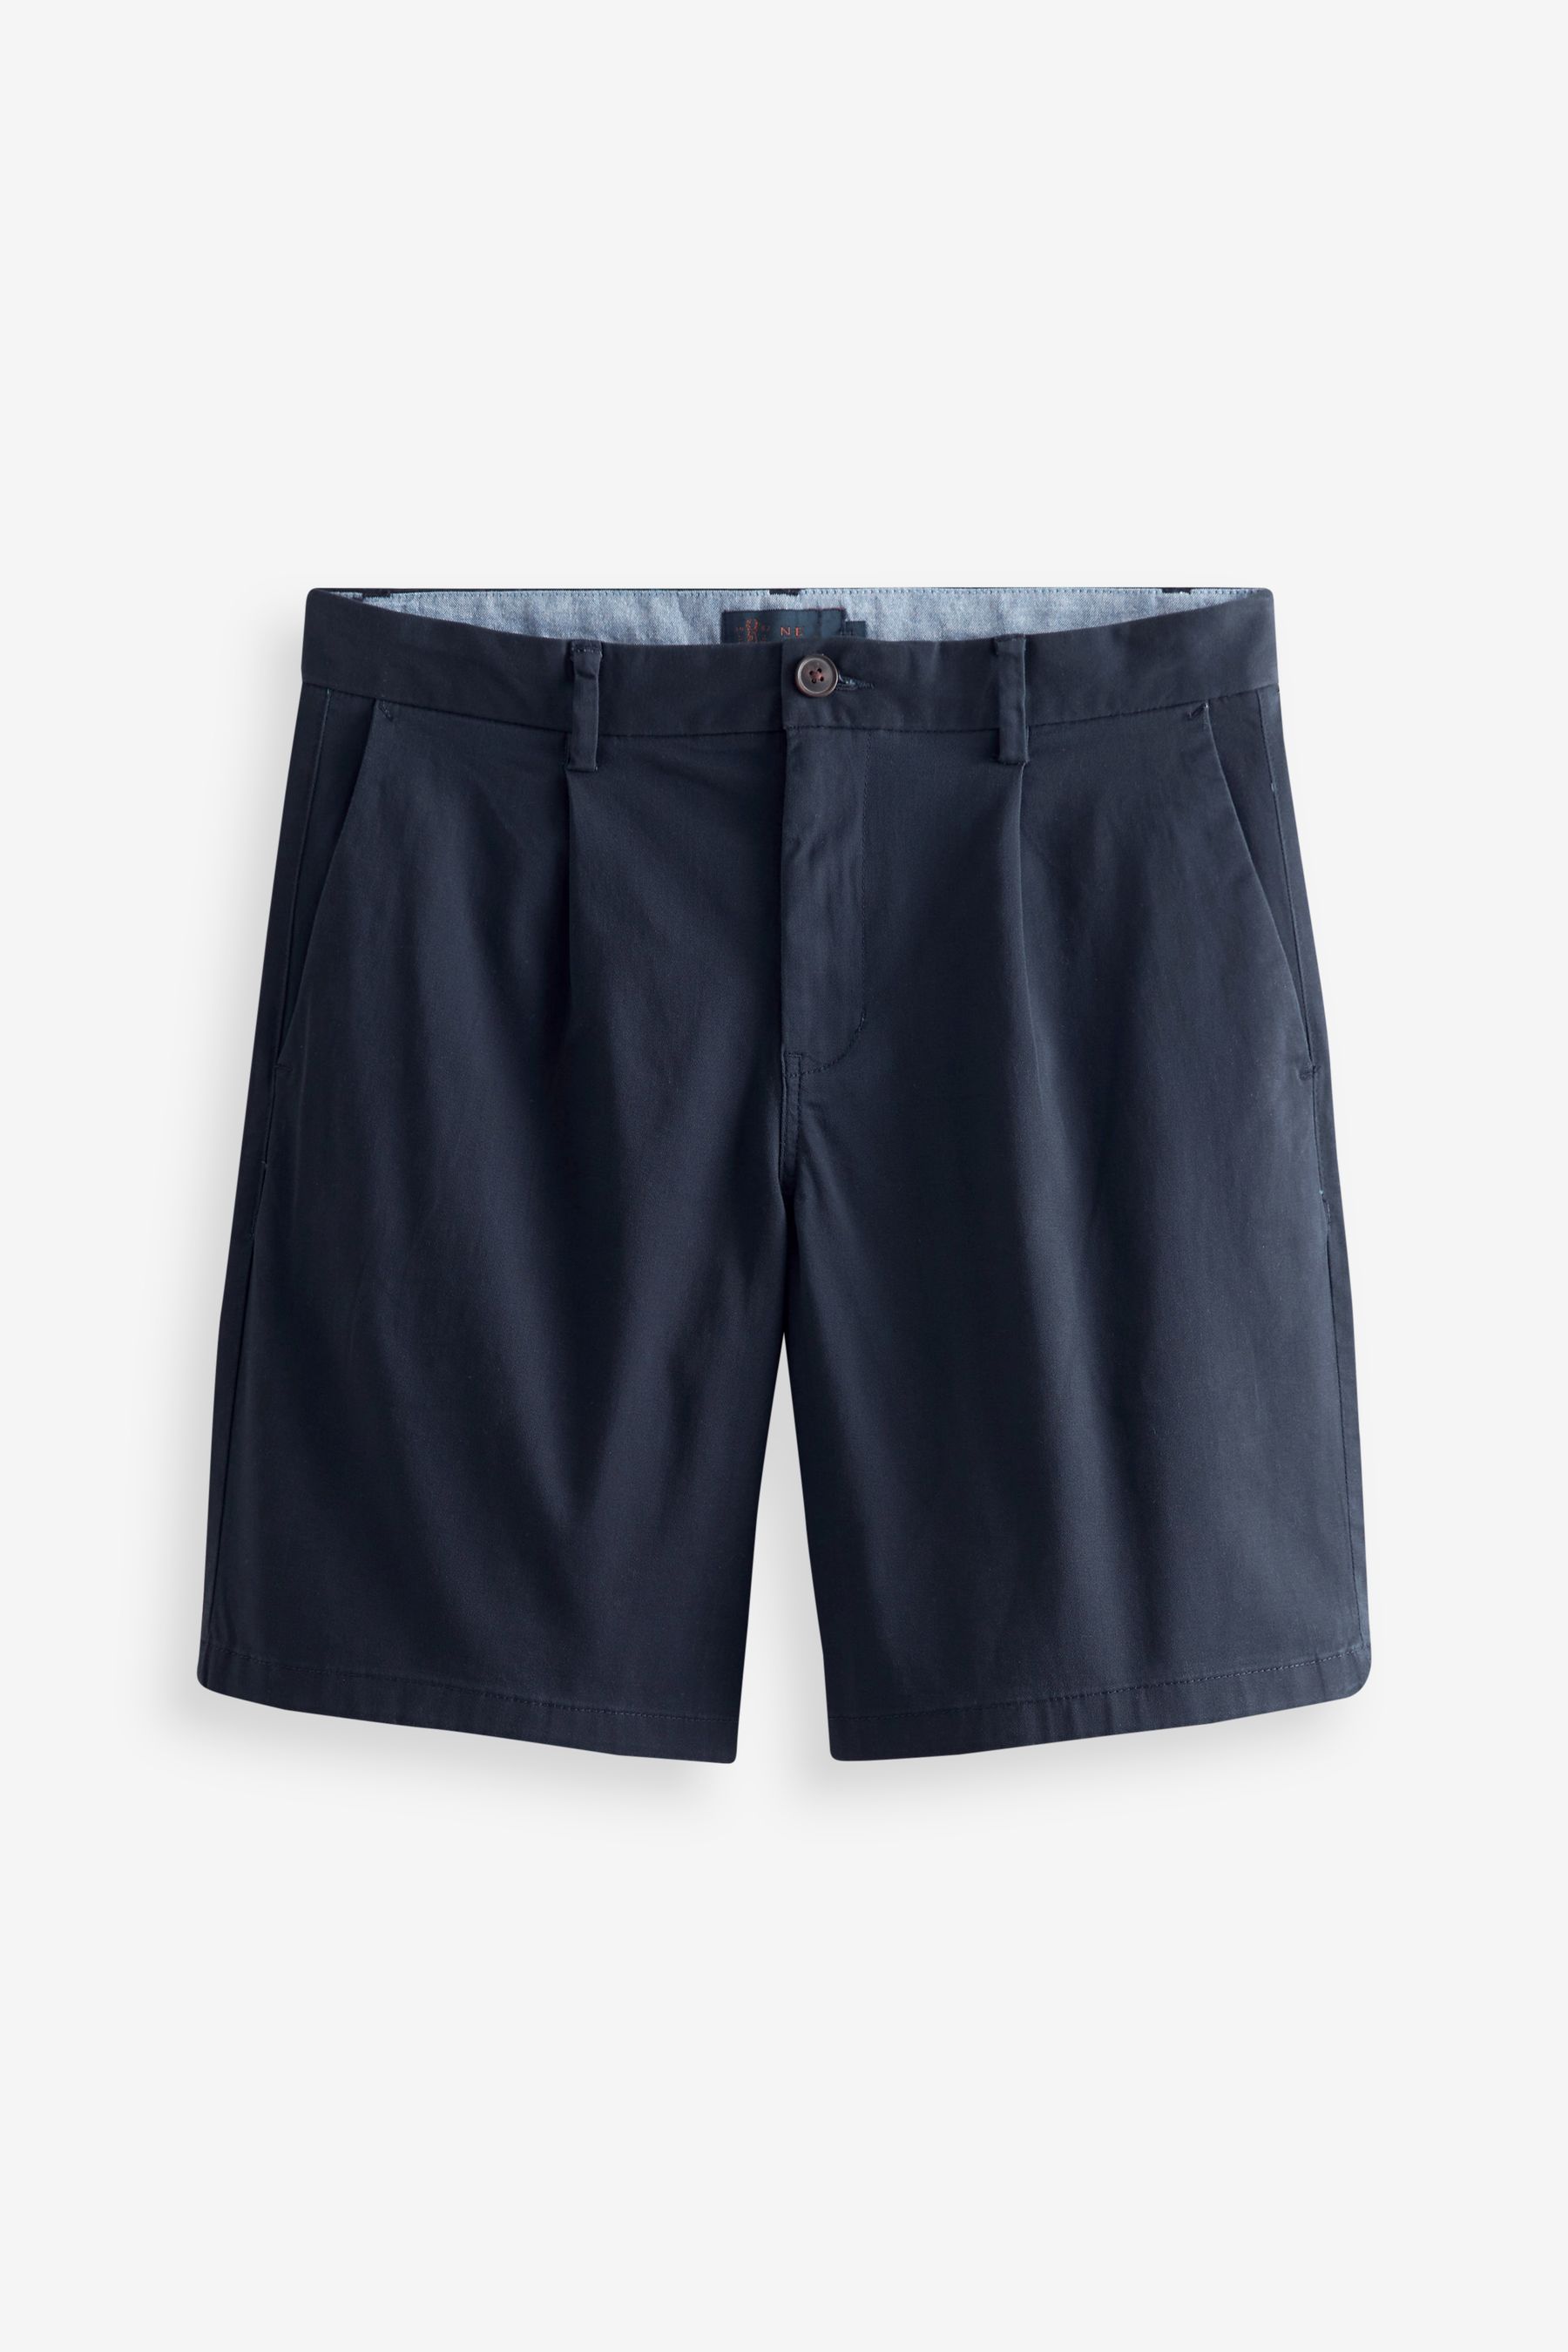 Buy Navy Blue Loose Stretch Chino Shorts from the Next UK online shop